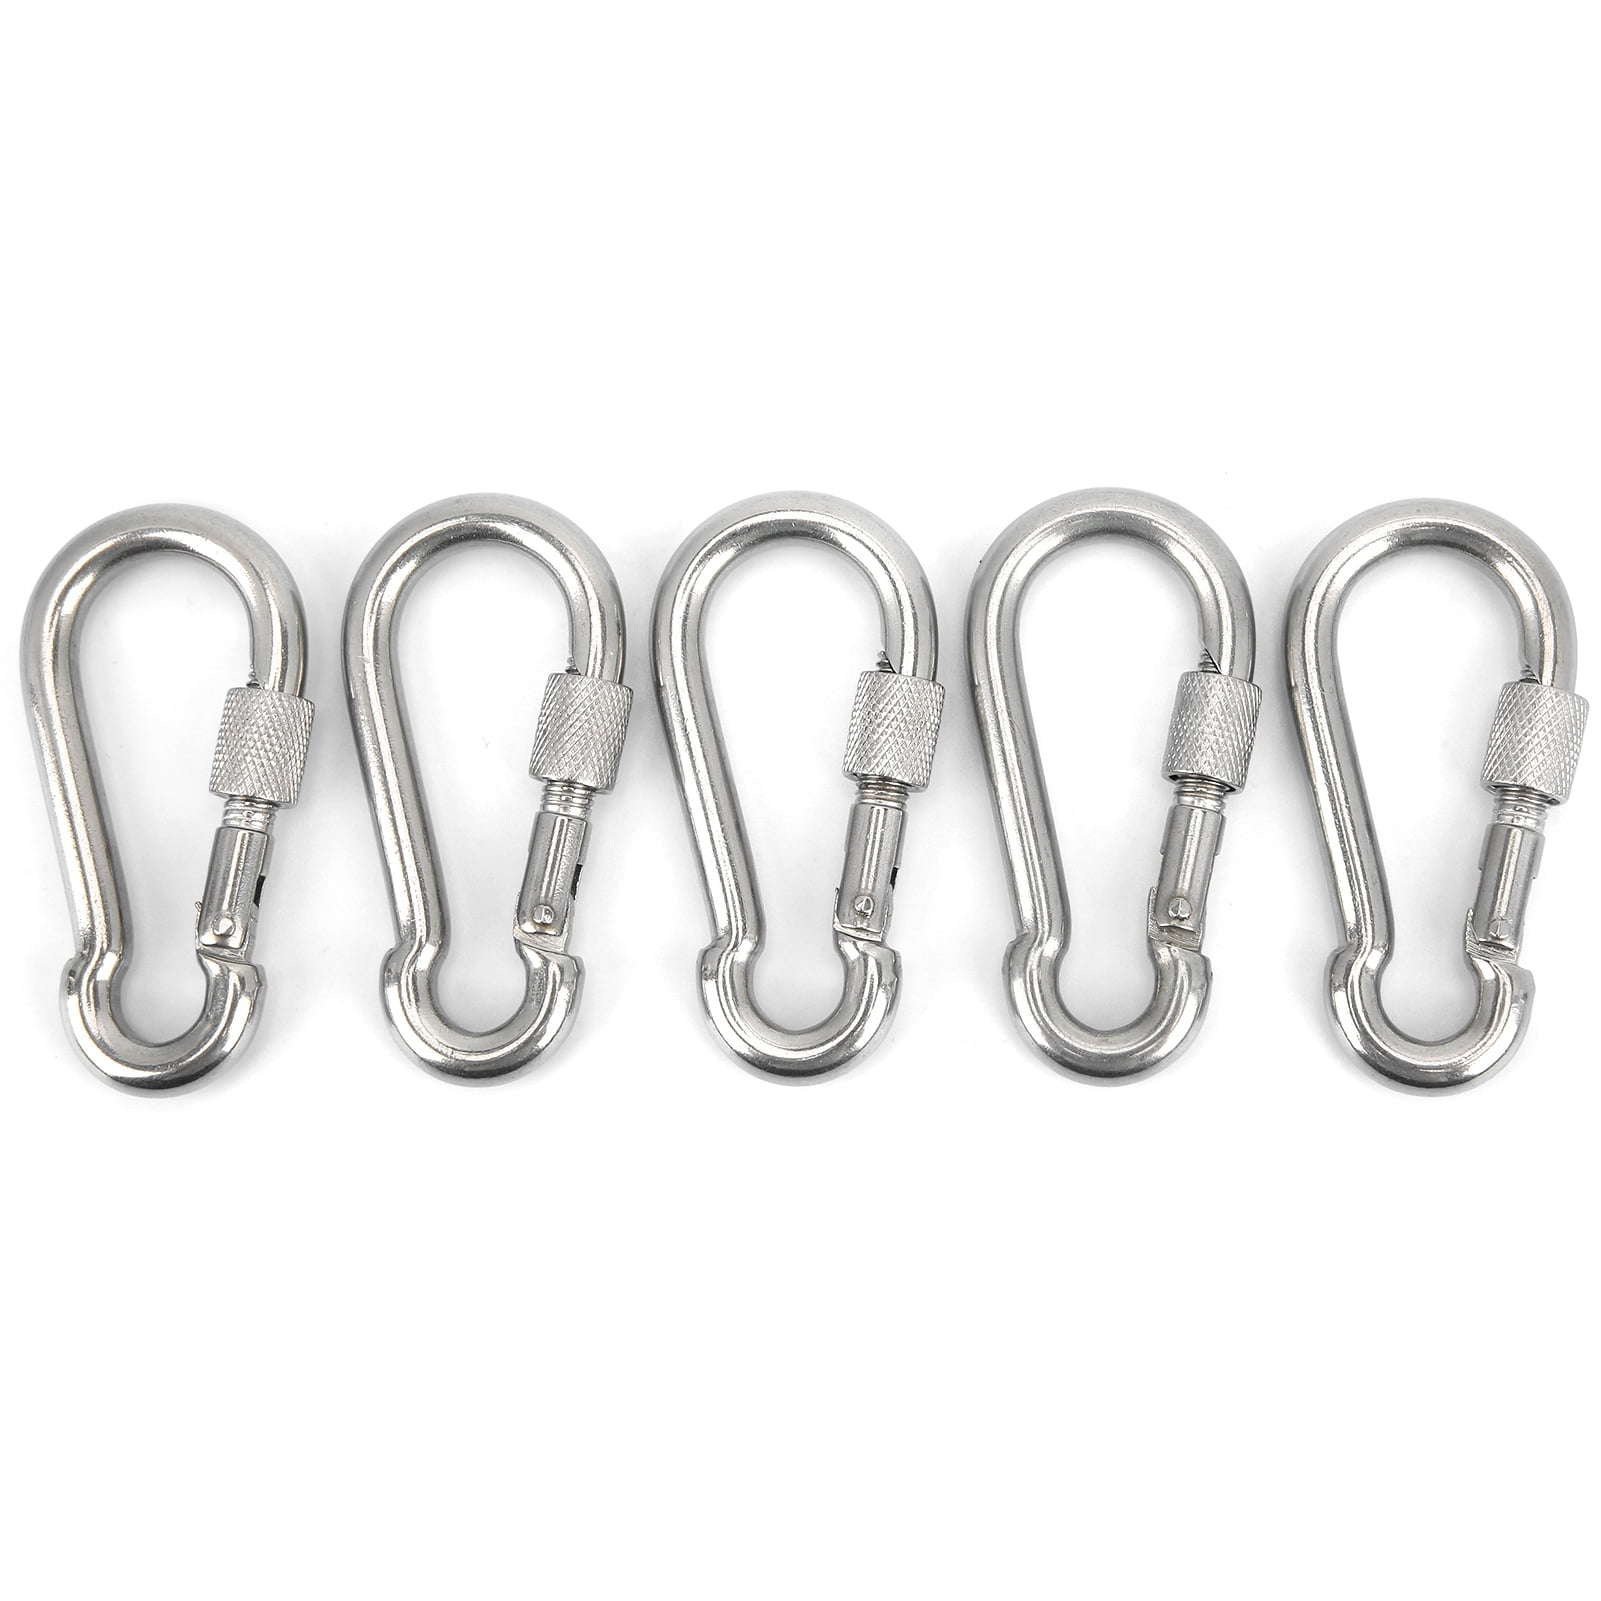 5pcs 80mm Carabiner Clip Stainless Steel Heavy Duty Spring Snap Hook Climbings 